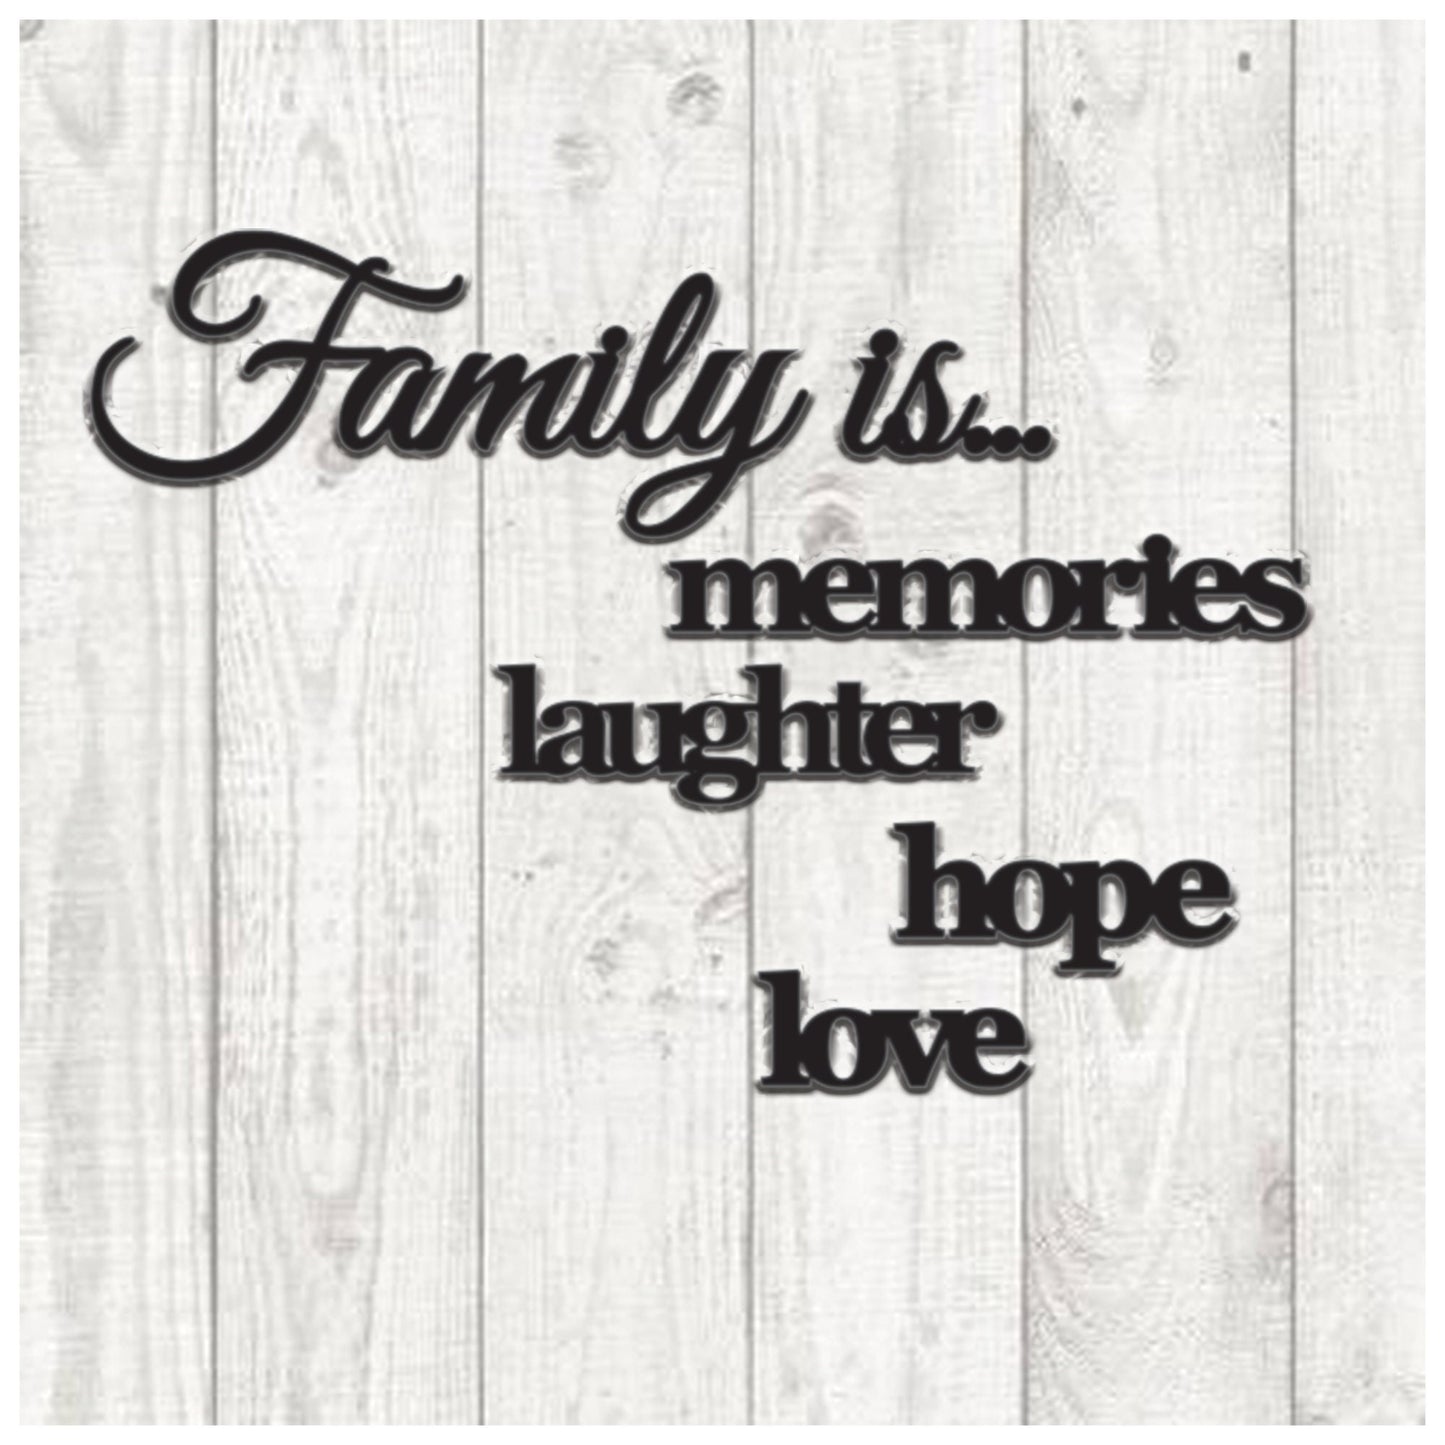 Wood words for gallery wall, Family is memories laughter love hope, word cutouts for picture collage wall, DIY project Home Decor Wall Art